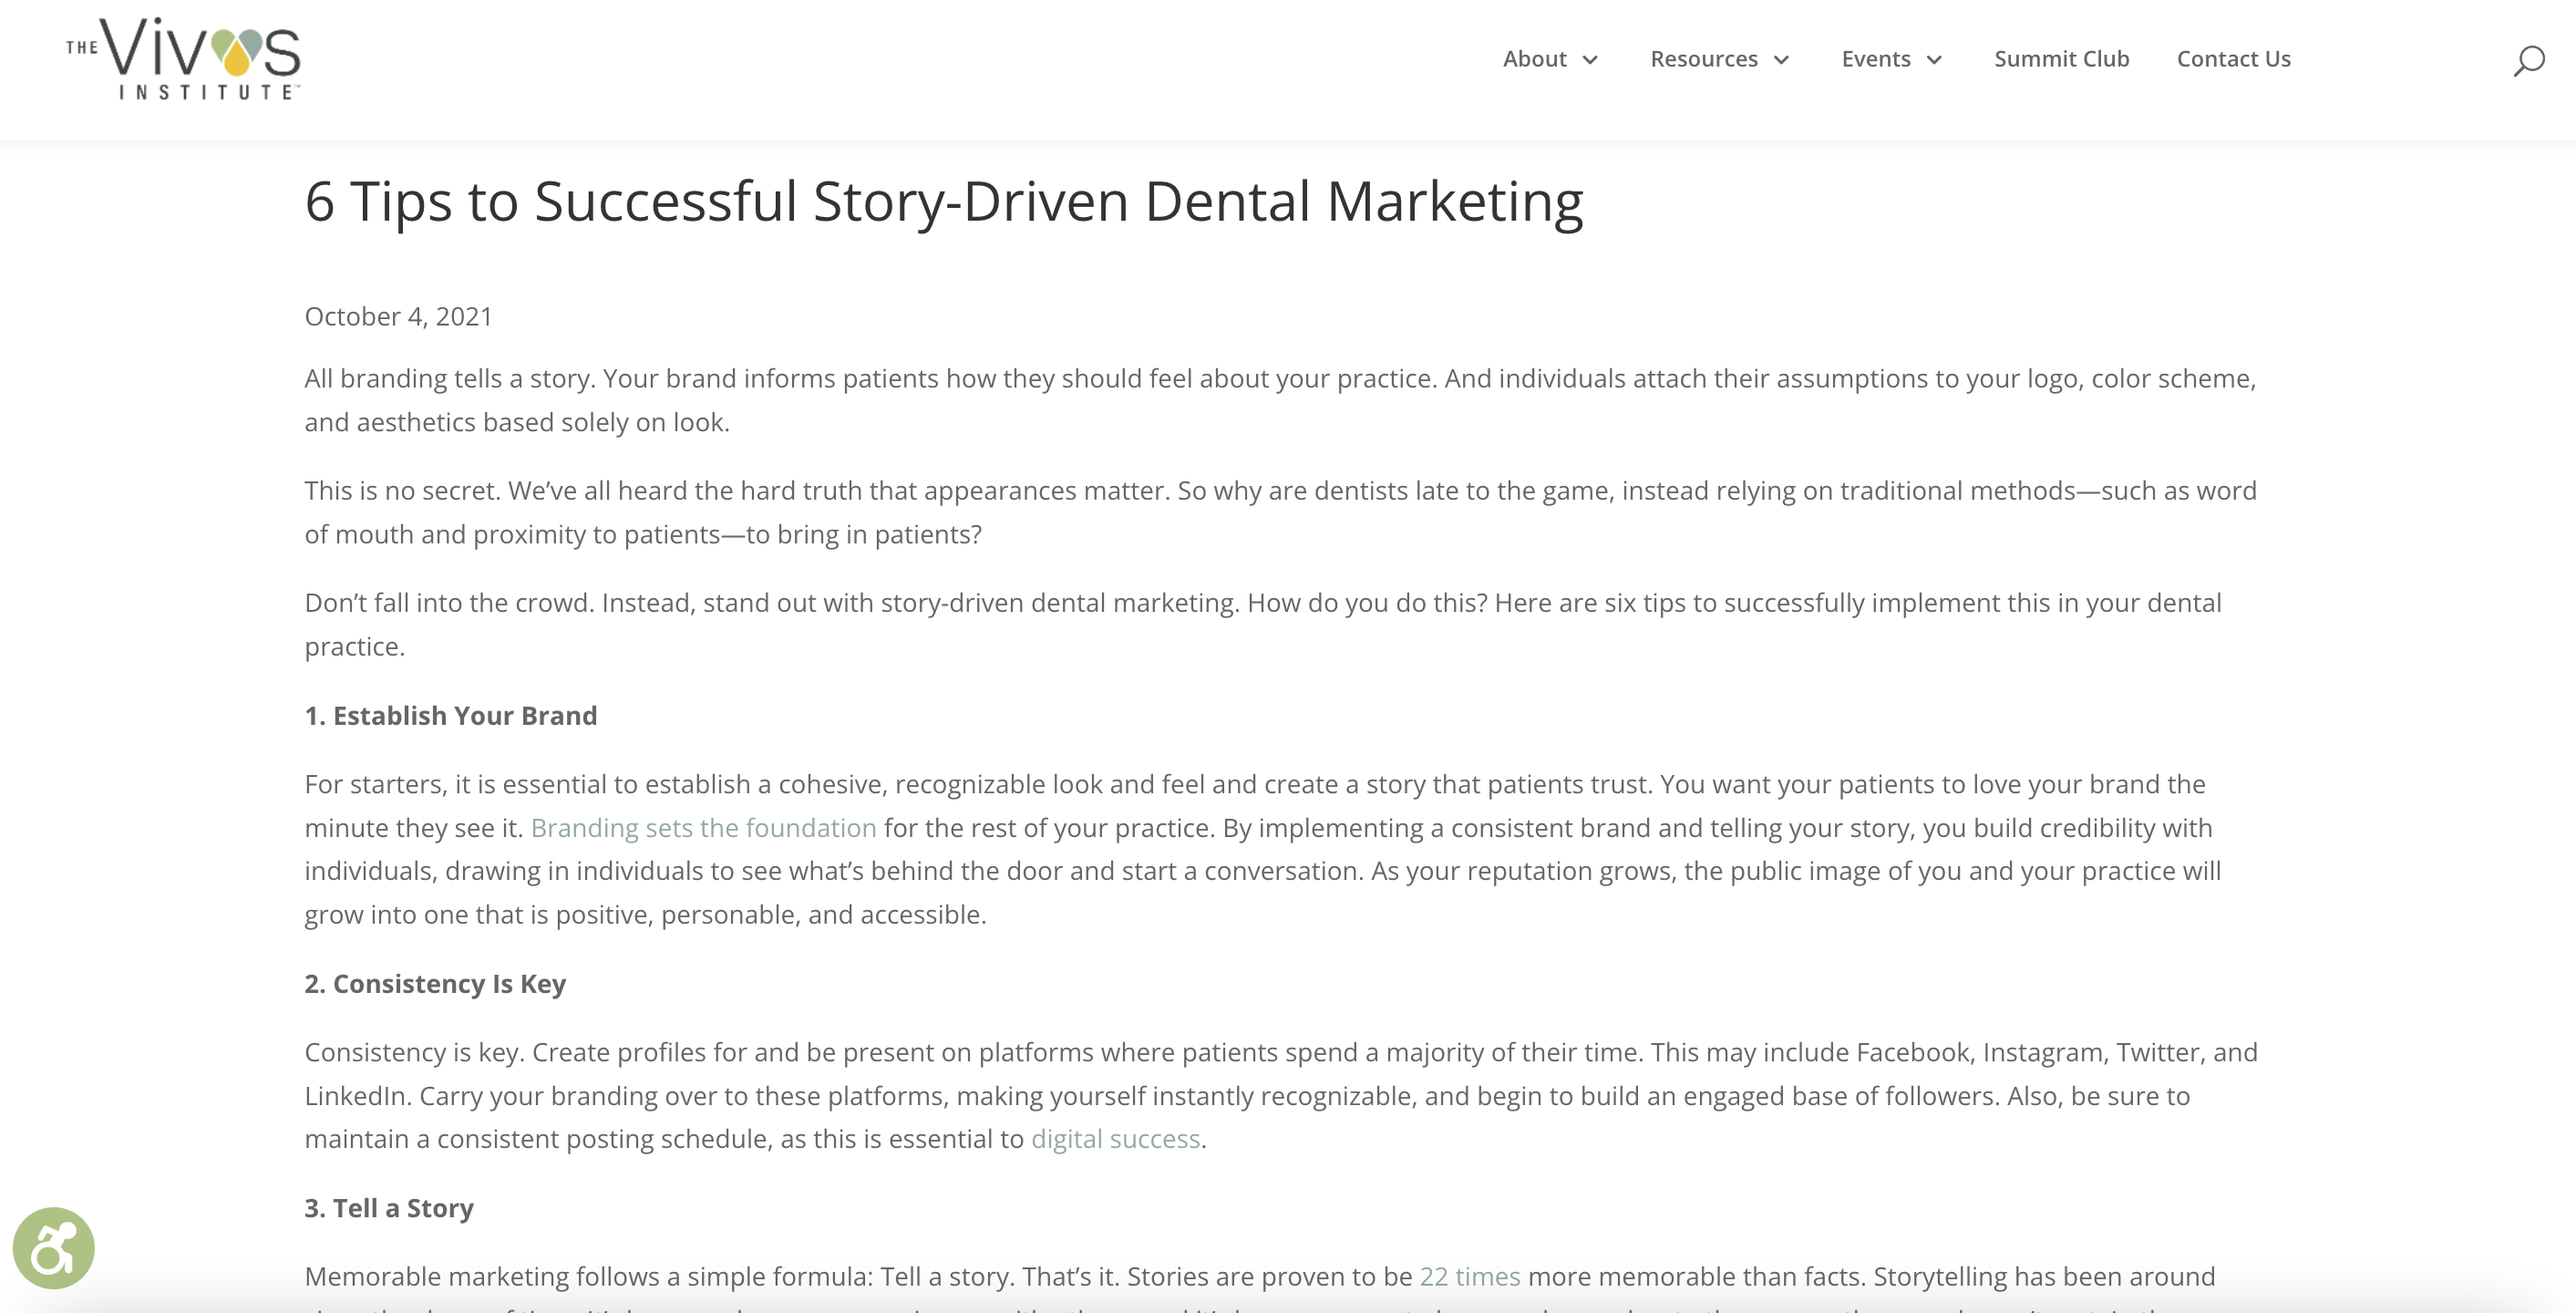 6 Tips to Successful Story-Driven Dental Marketing